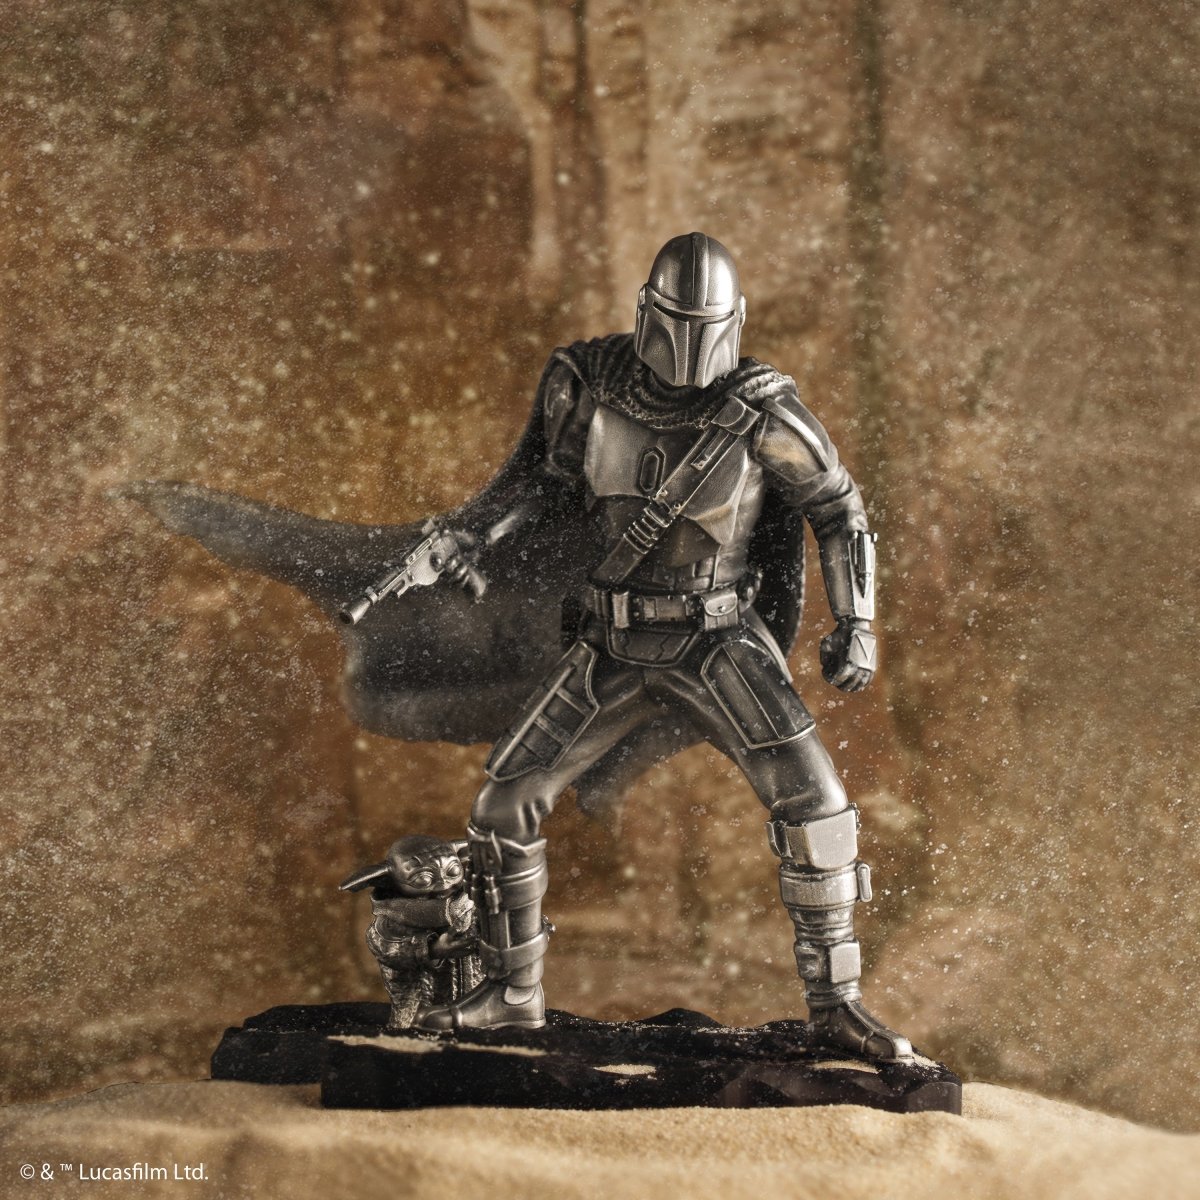 Star Wars Mandalorian Limited Edition Figurine - Collectible Statue